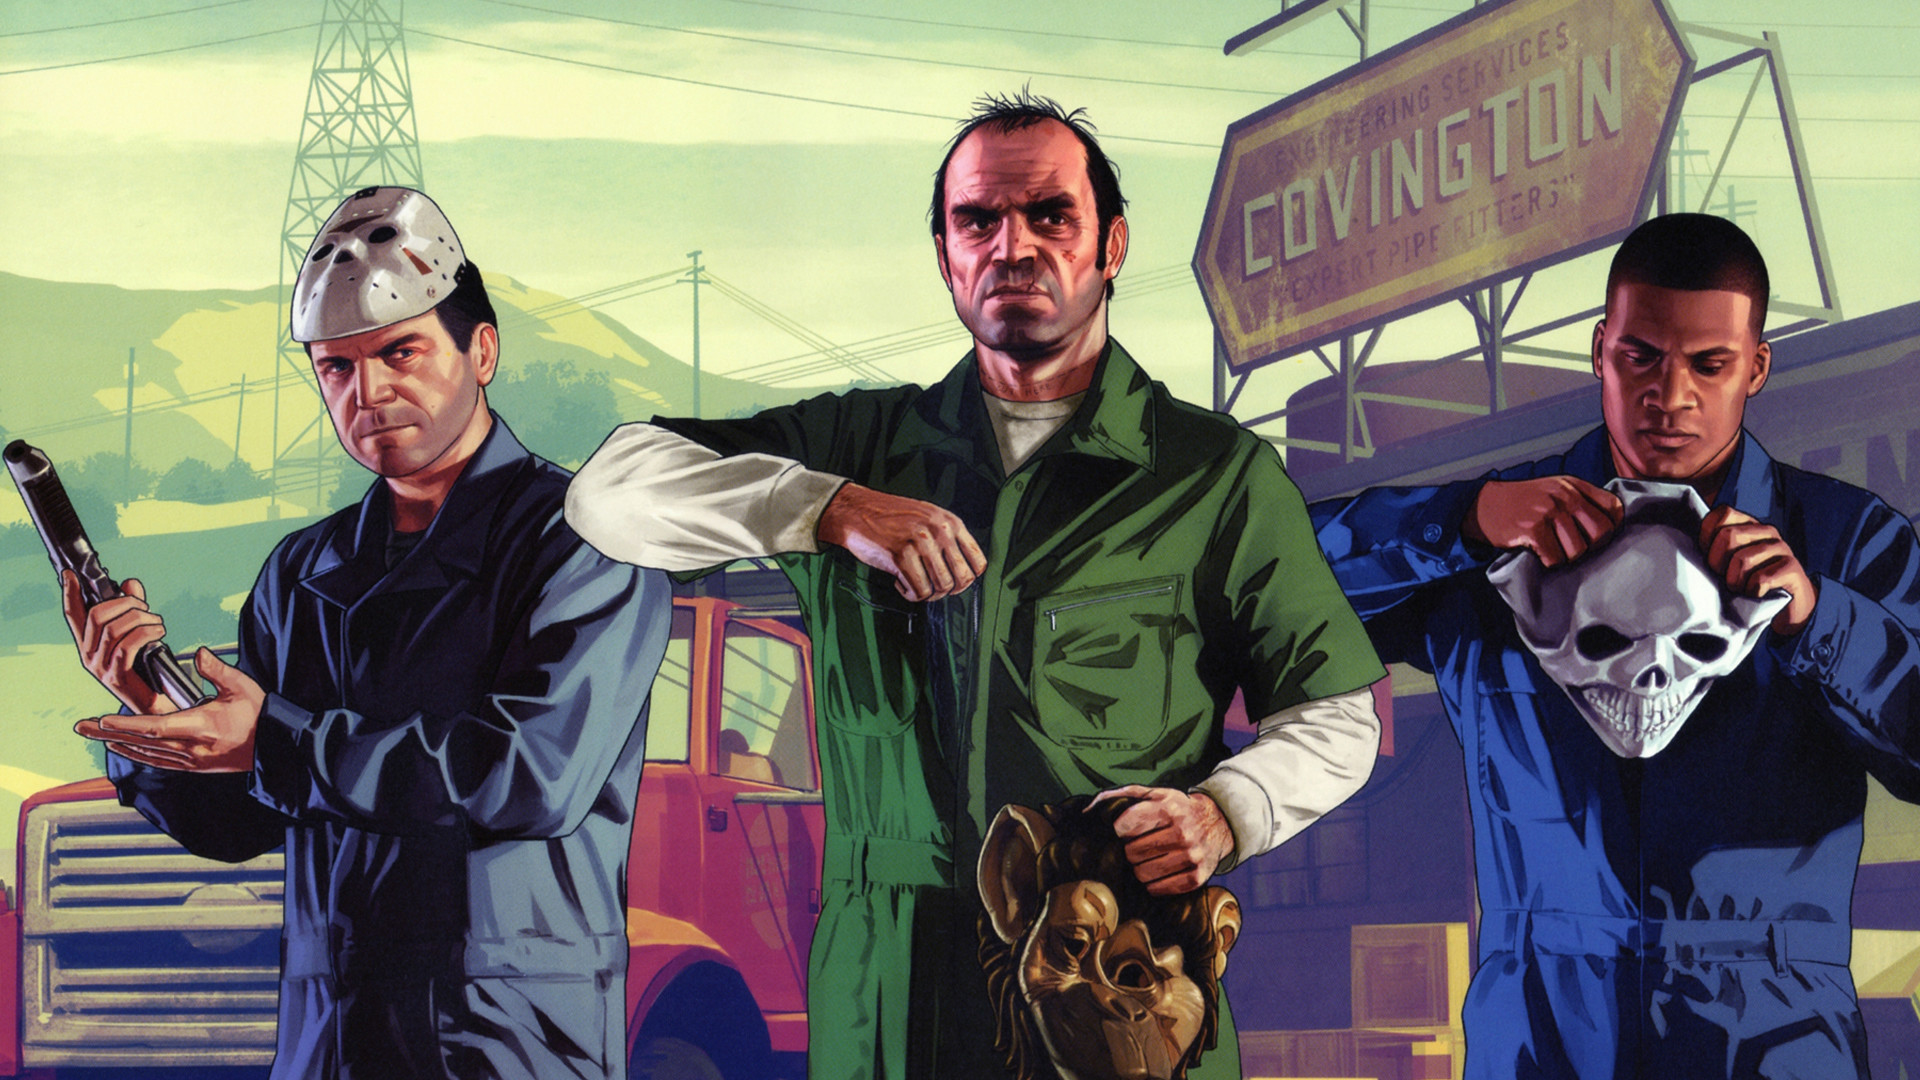 GTA 5 Live Wallpapers (70+ images)